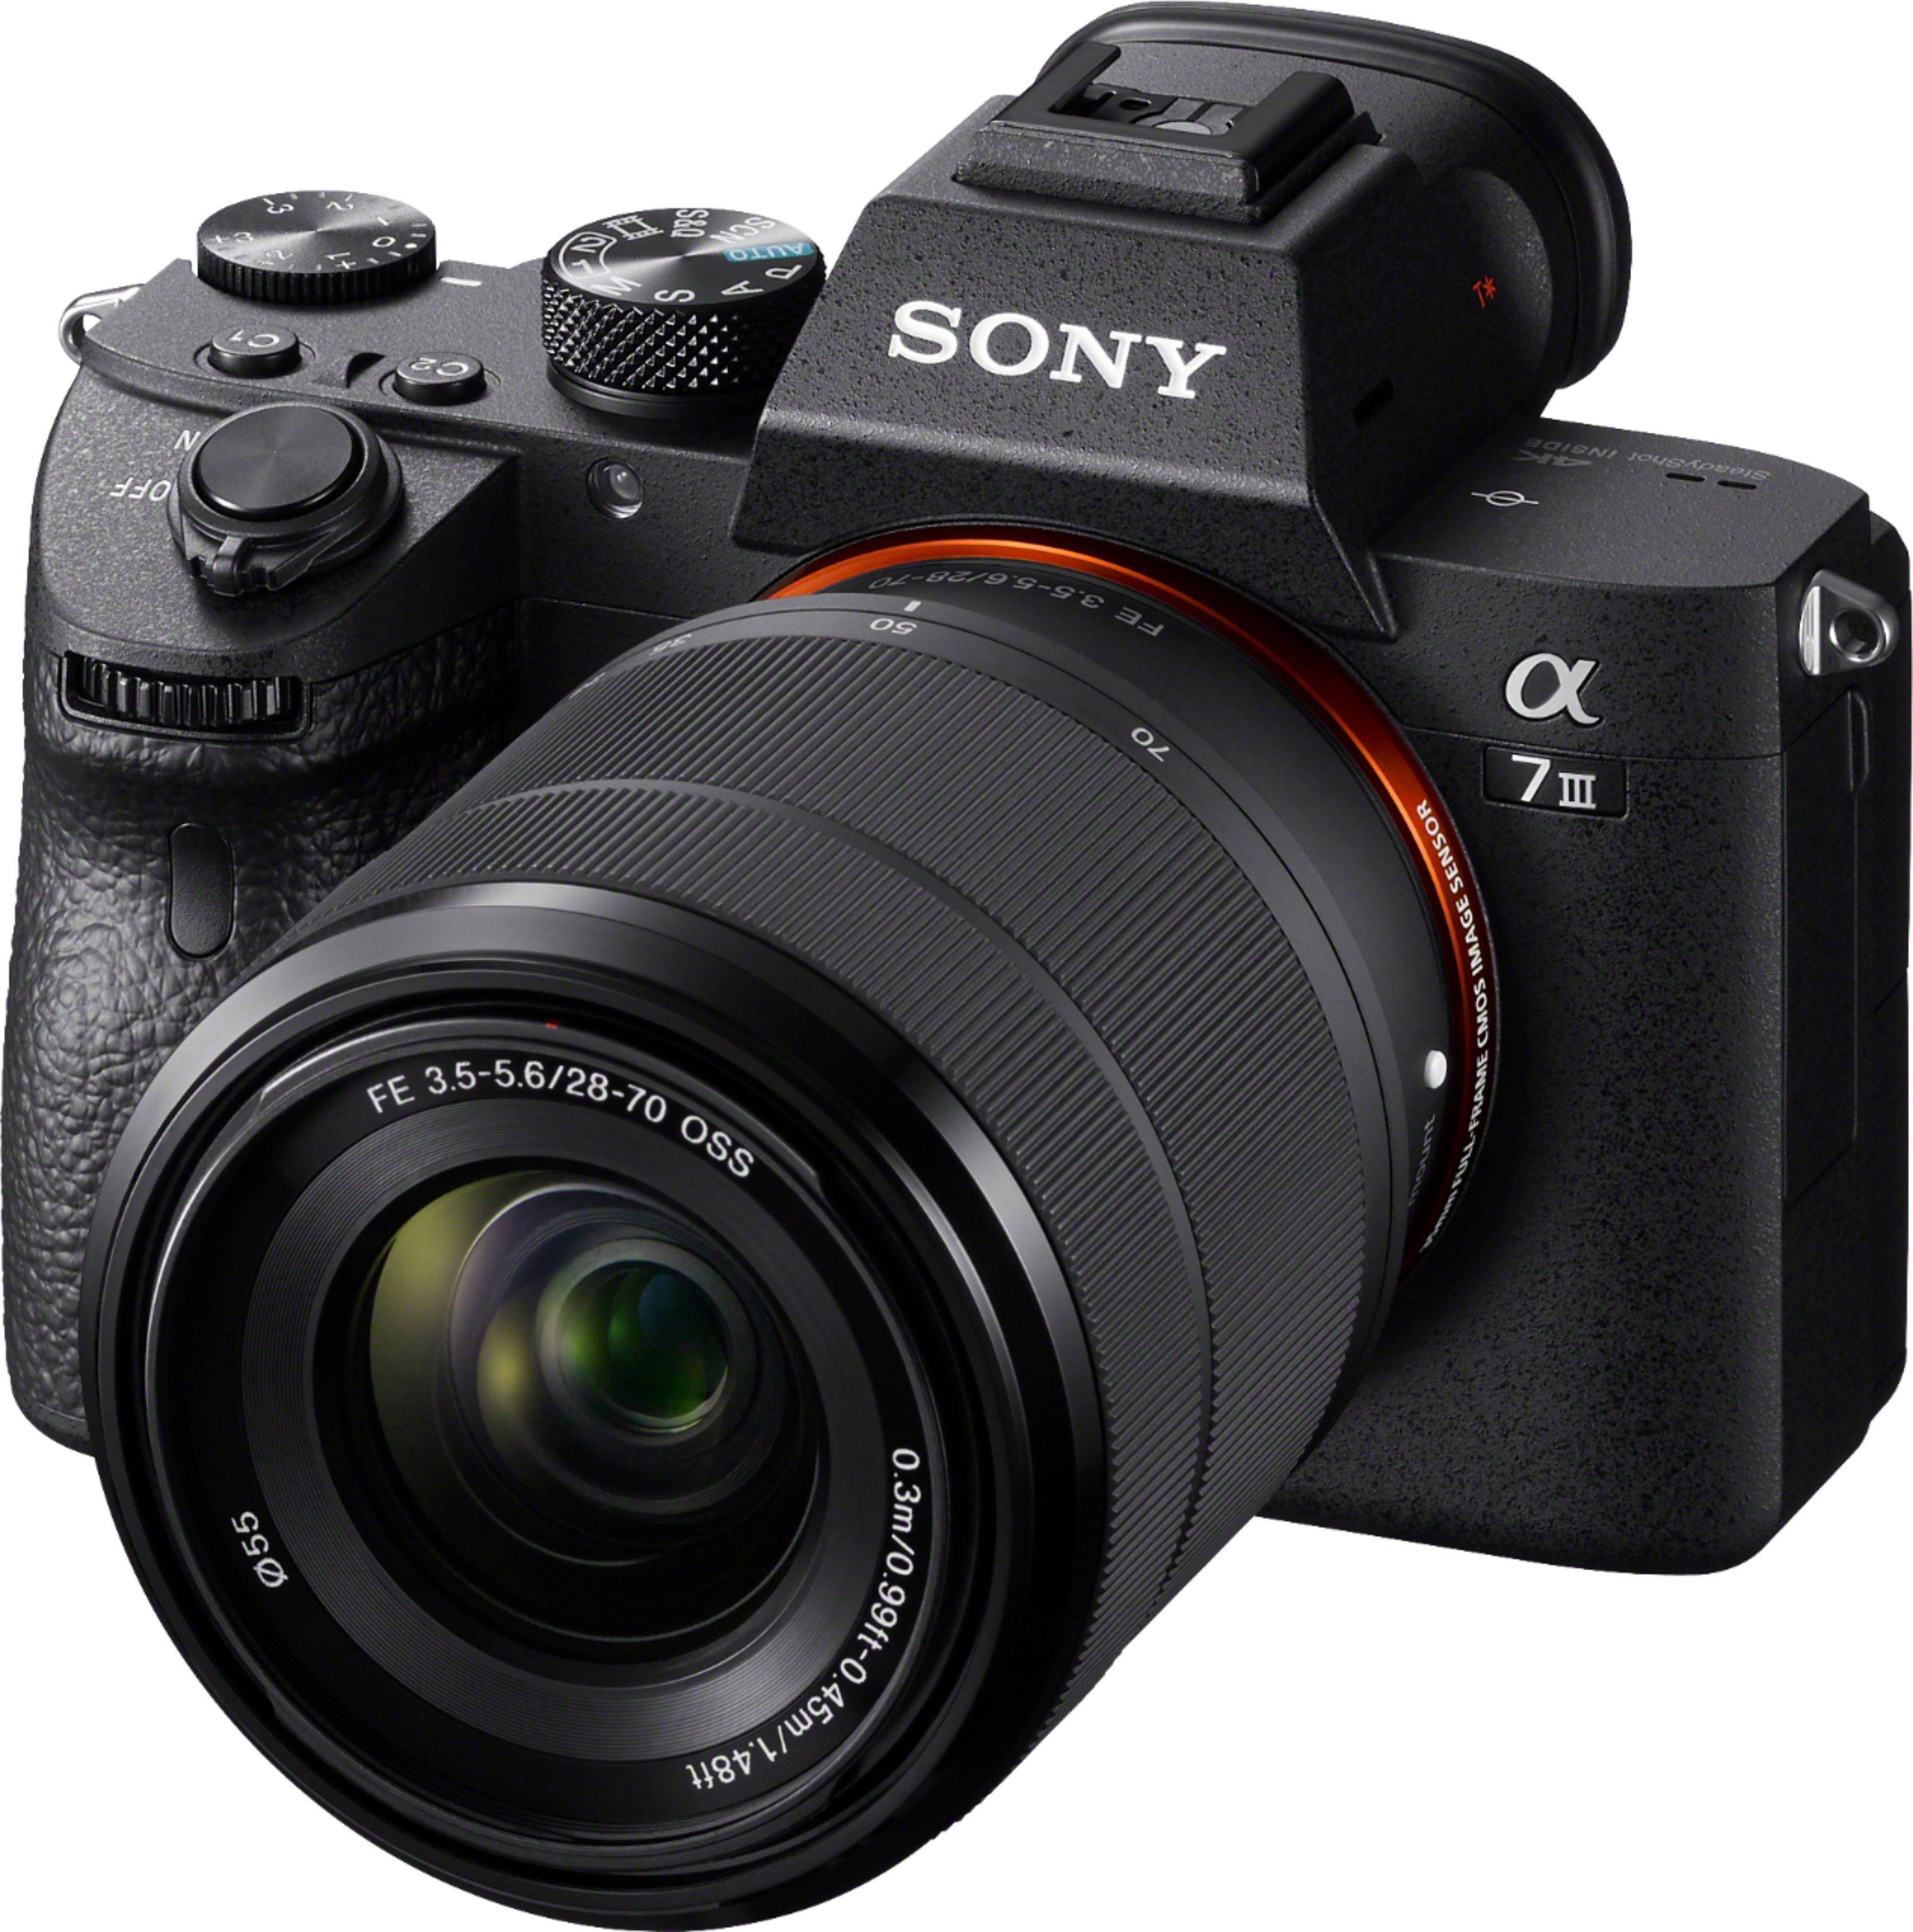 Left View: Sony - Alpha a7 III Mirrorless [Video] Camera with FE 28-70 mm F3.5-5.6 OSS Lens - Black